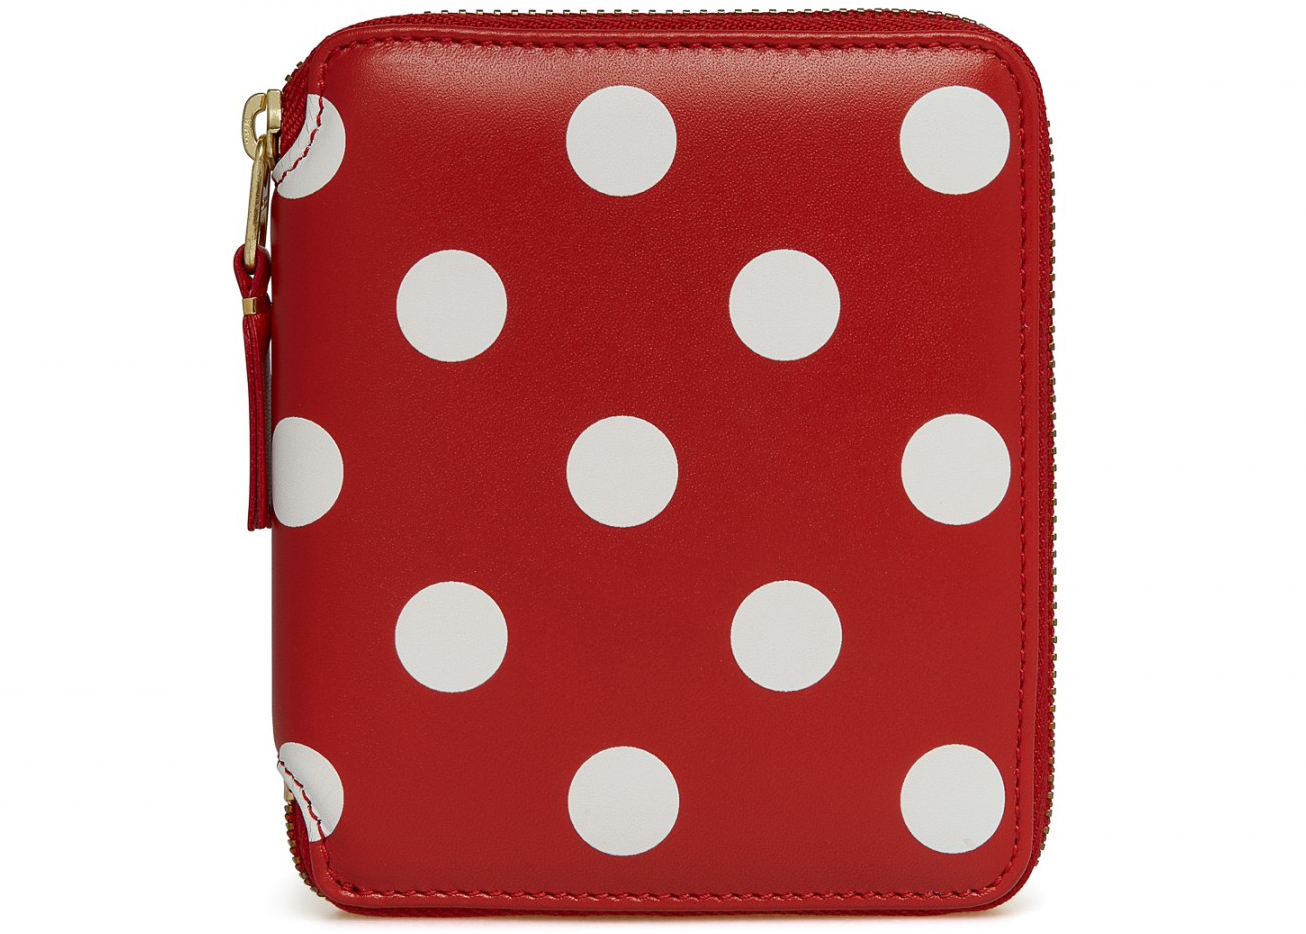 Comme des Garcons SA2100PD Wallet Polka Dots Red in Leather with 